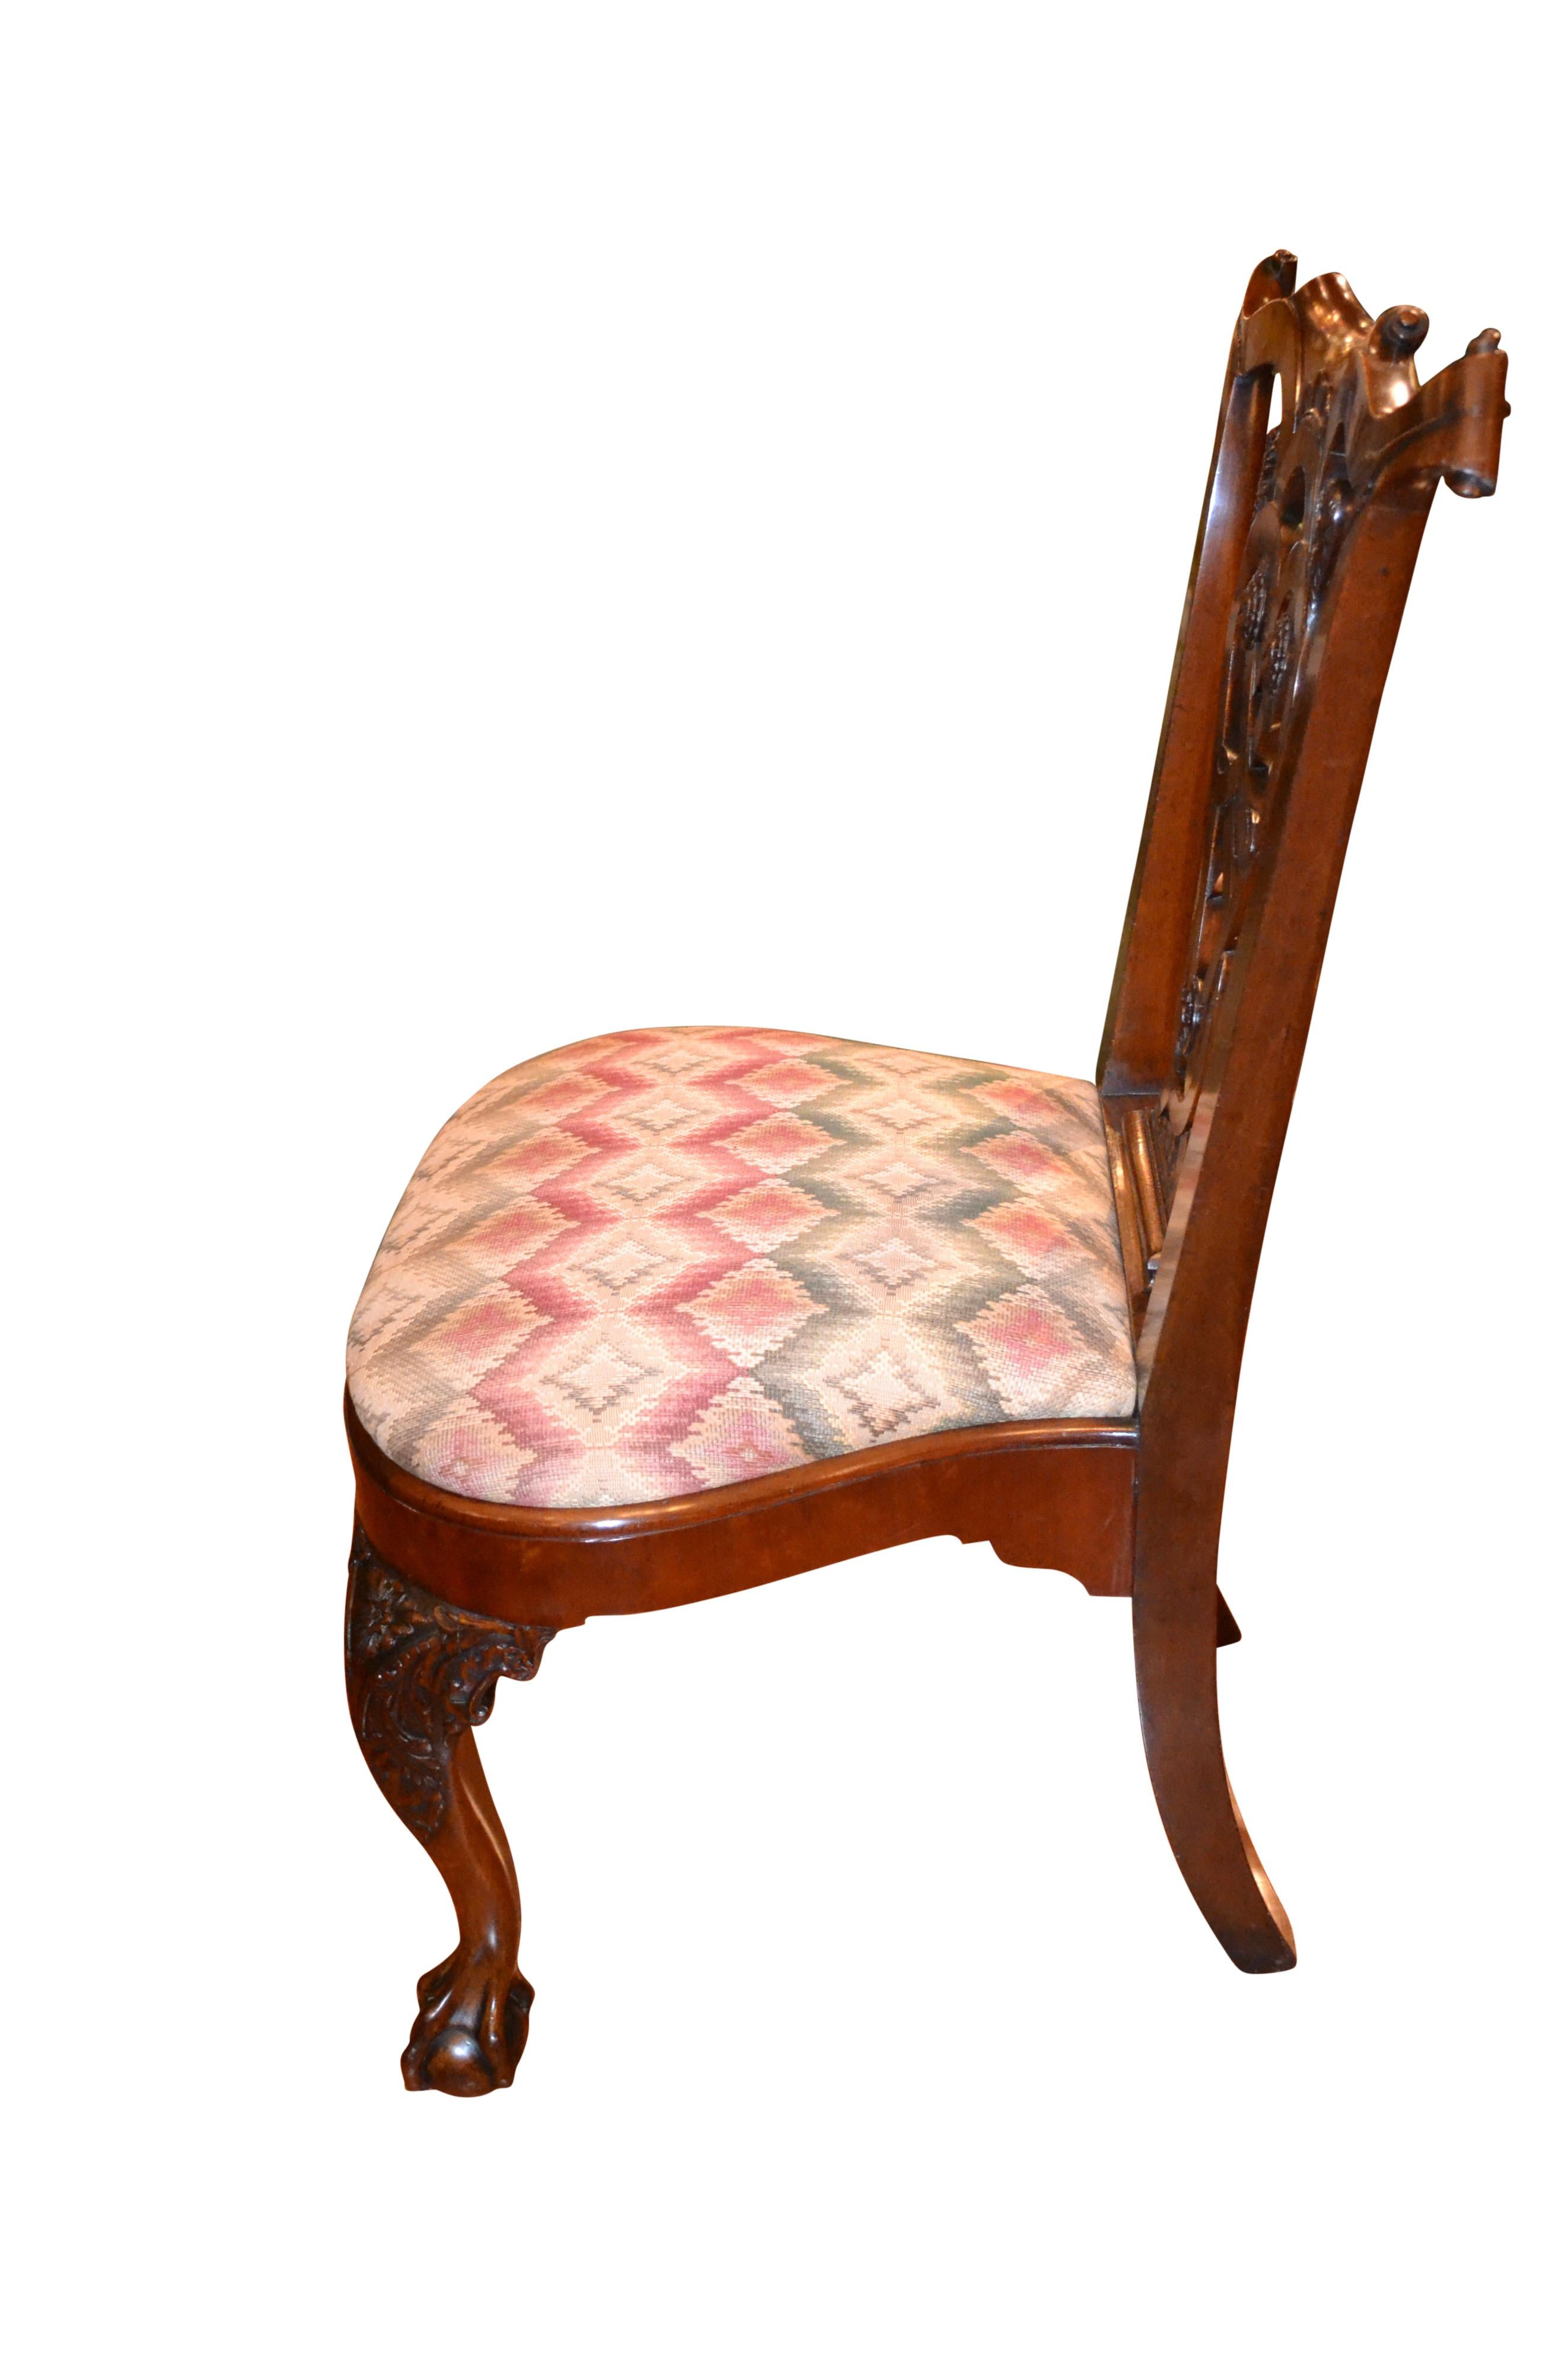 history of queening chairs